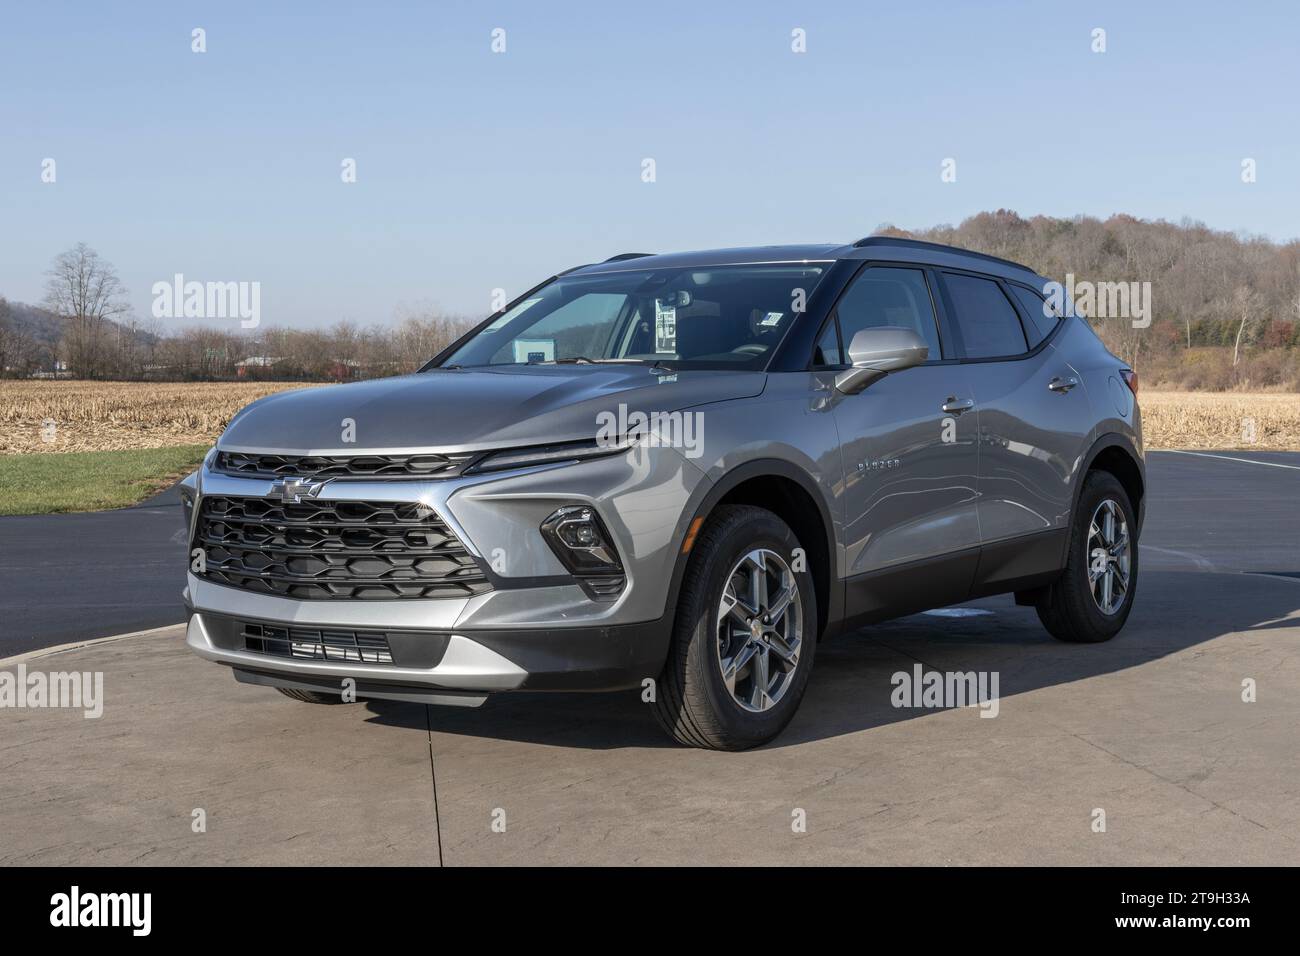 West Harrison - November 23, 2023: Chevrolet Blazer display at a dealership. Chevy also offers the Blazer in 2LT, 3LT and RS models. Stock Photo